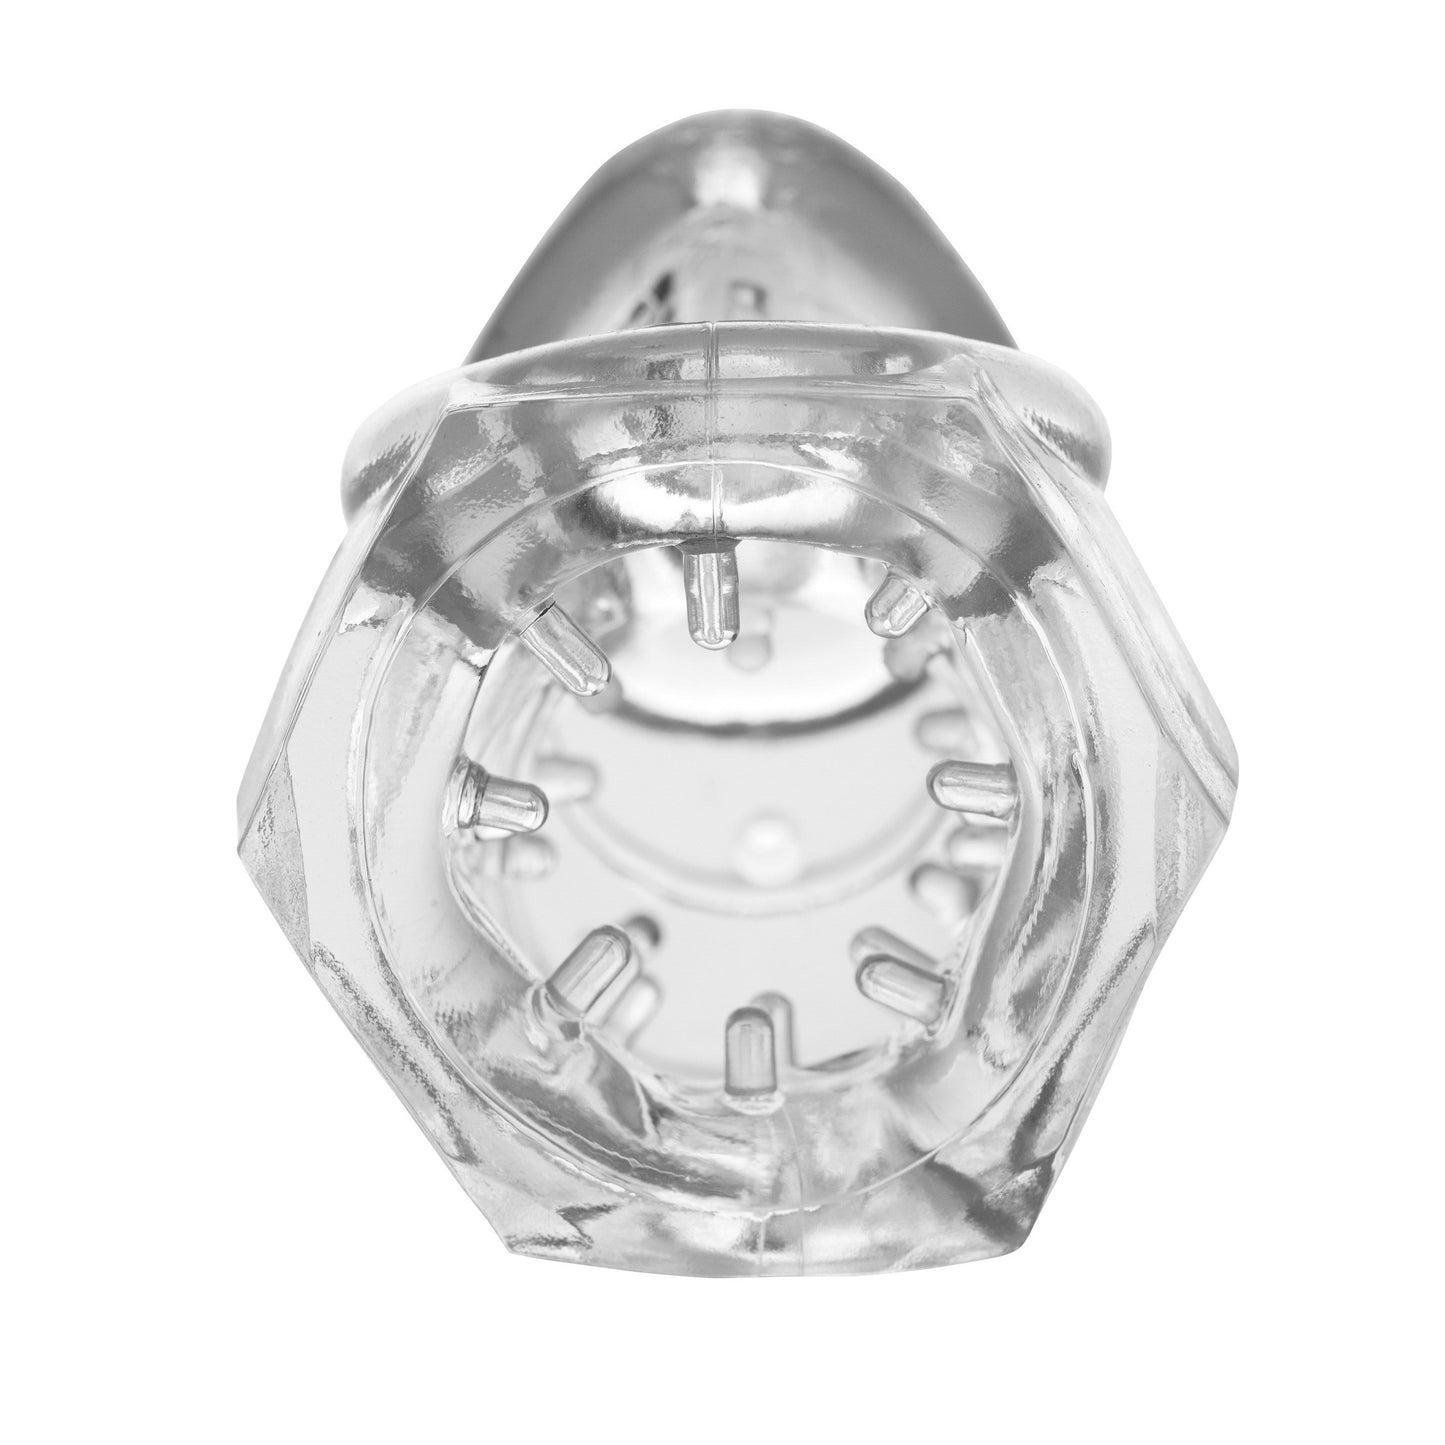 Detained 2.0 Restrictive Chastity Cage With Nubs